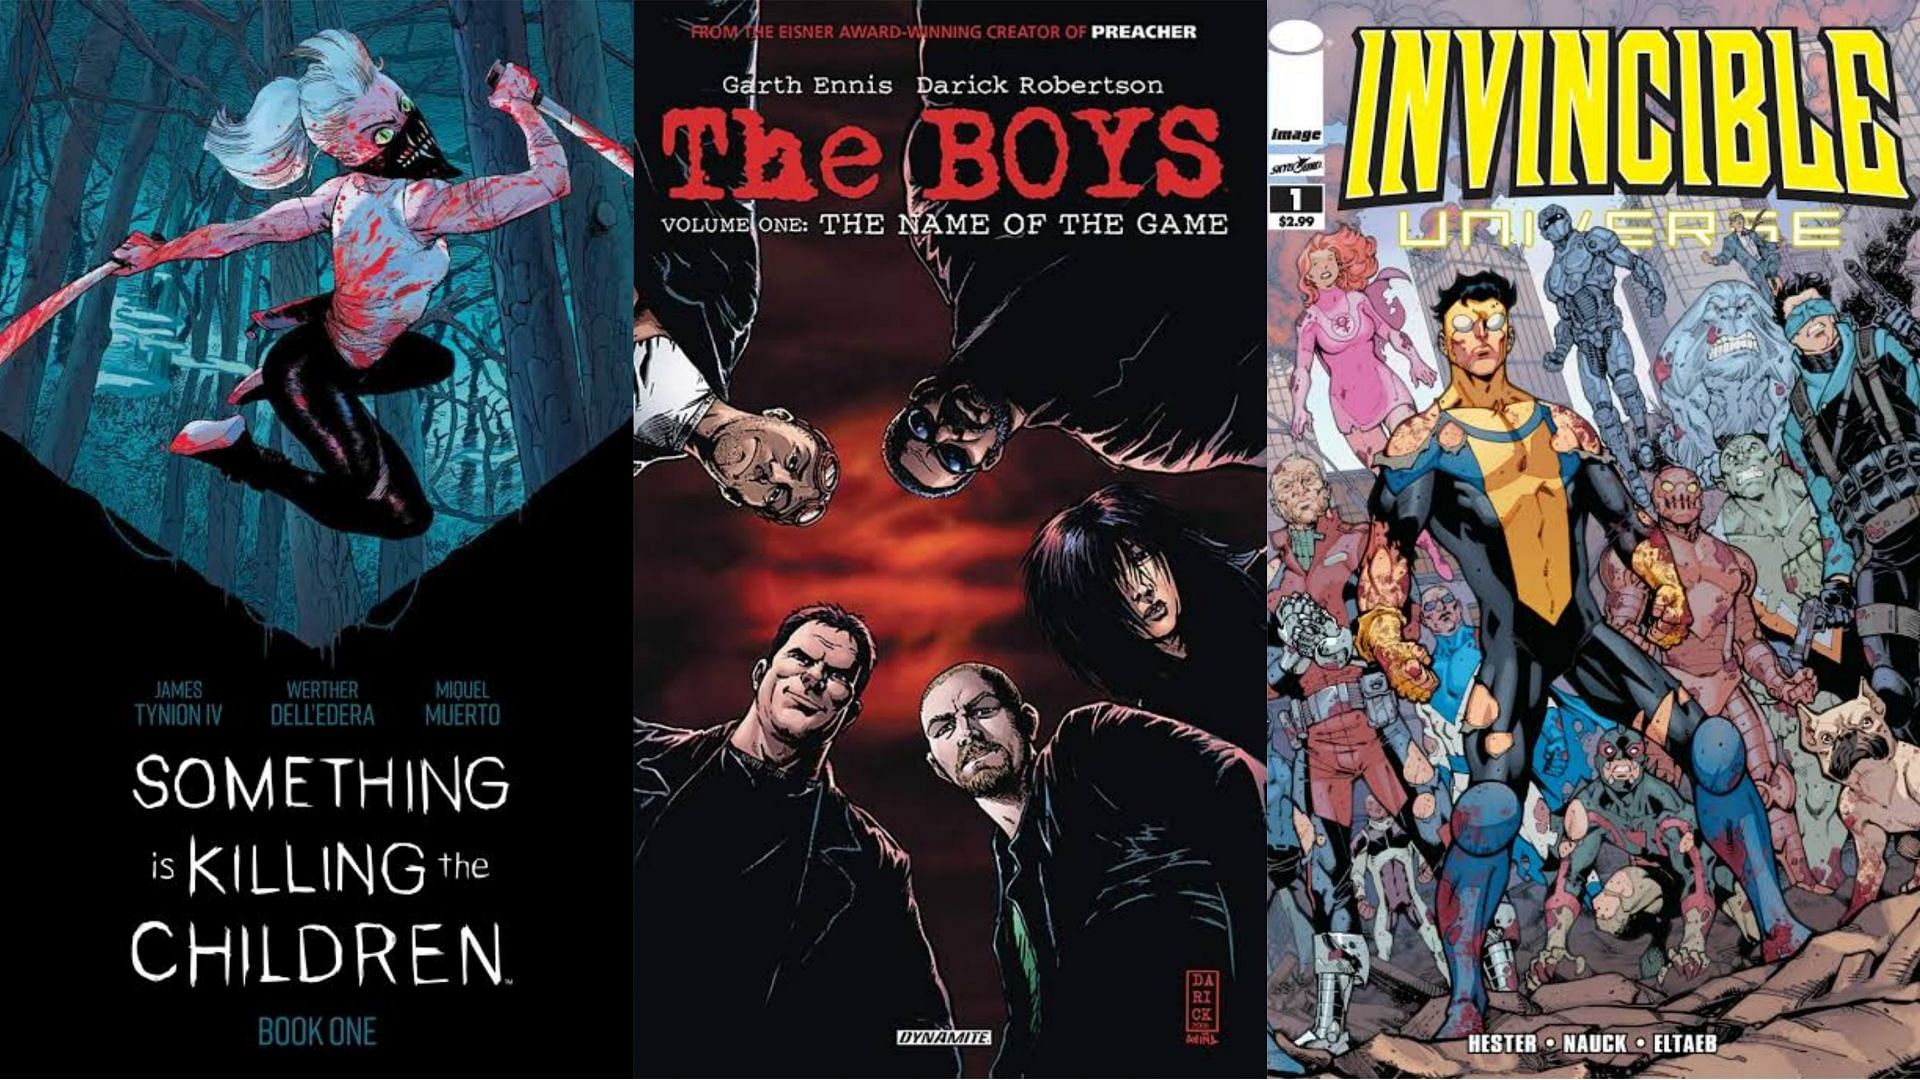 Something is Killing the Children, The Boys and Invincible (Image via Boom! Studios, Wildstorm Comics and Image Comics)